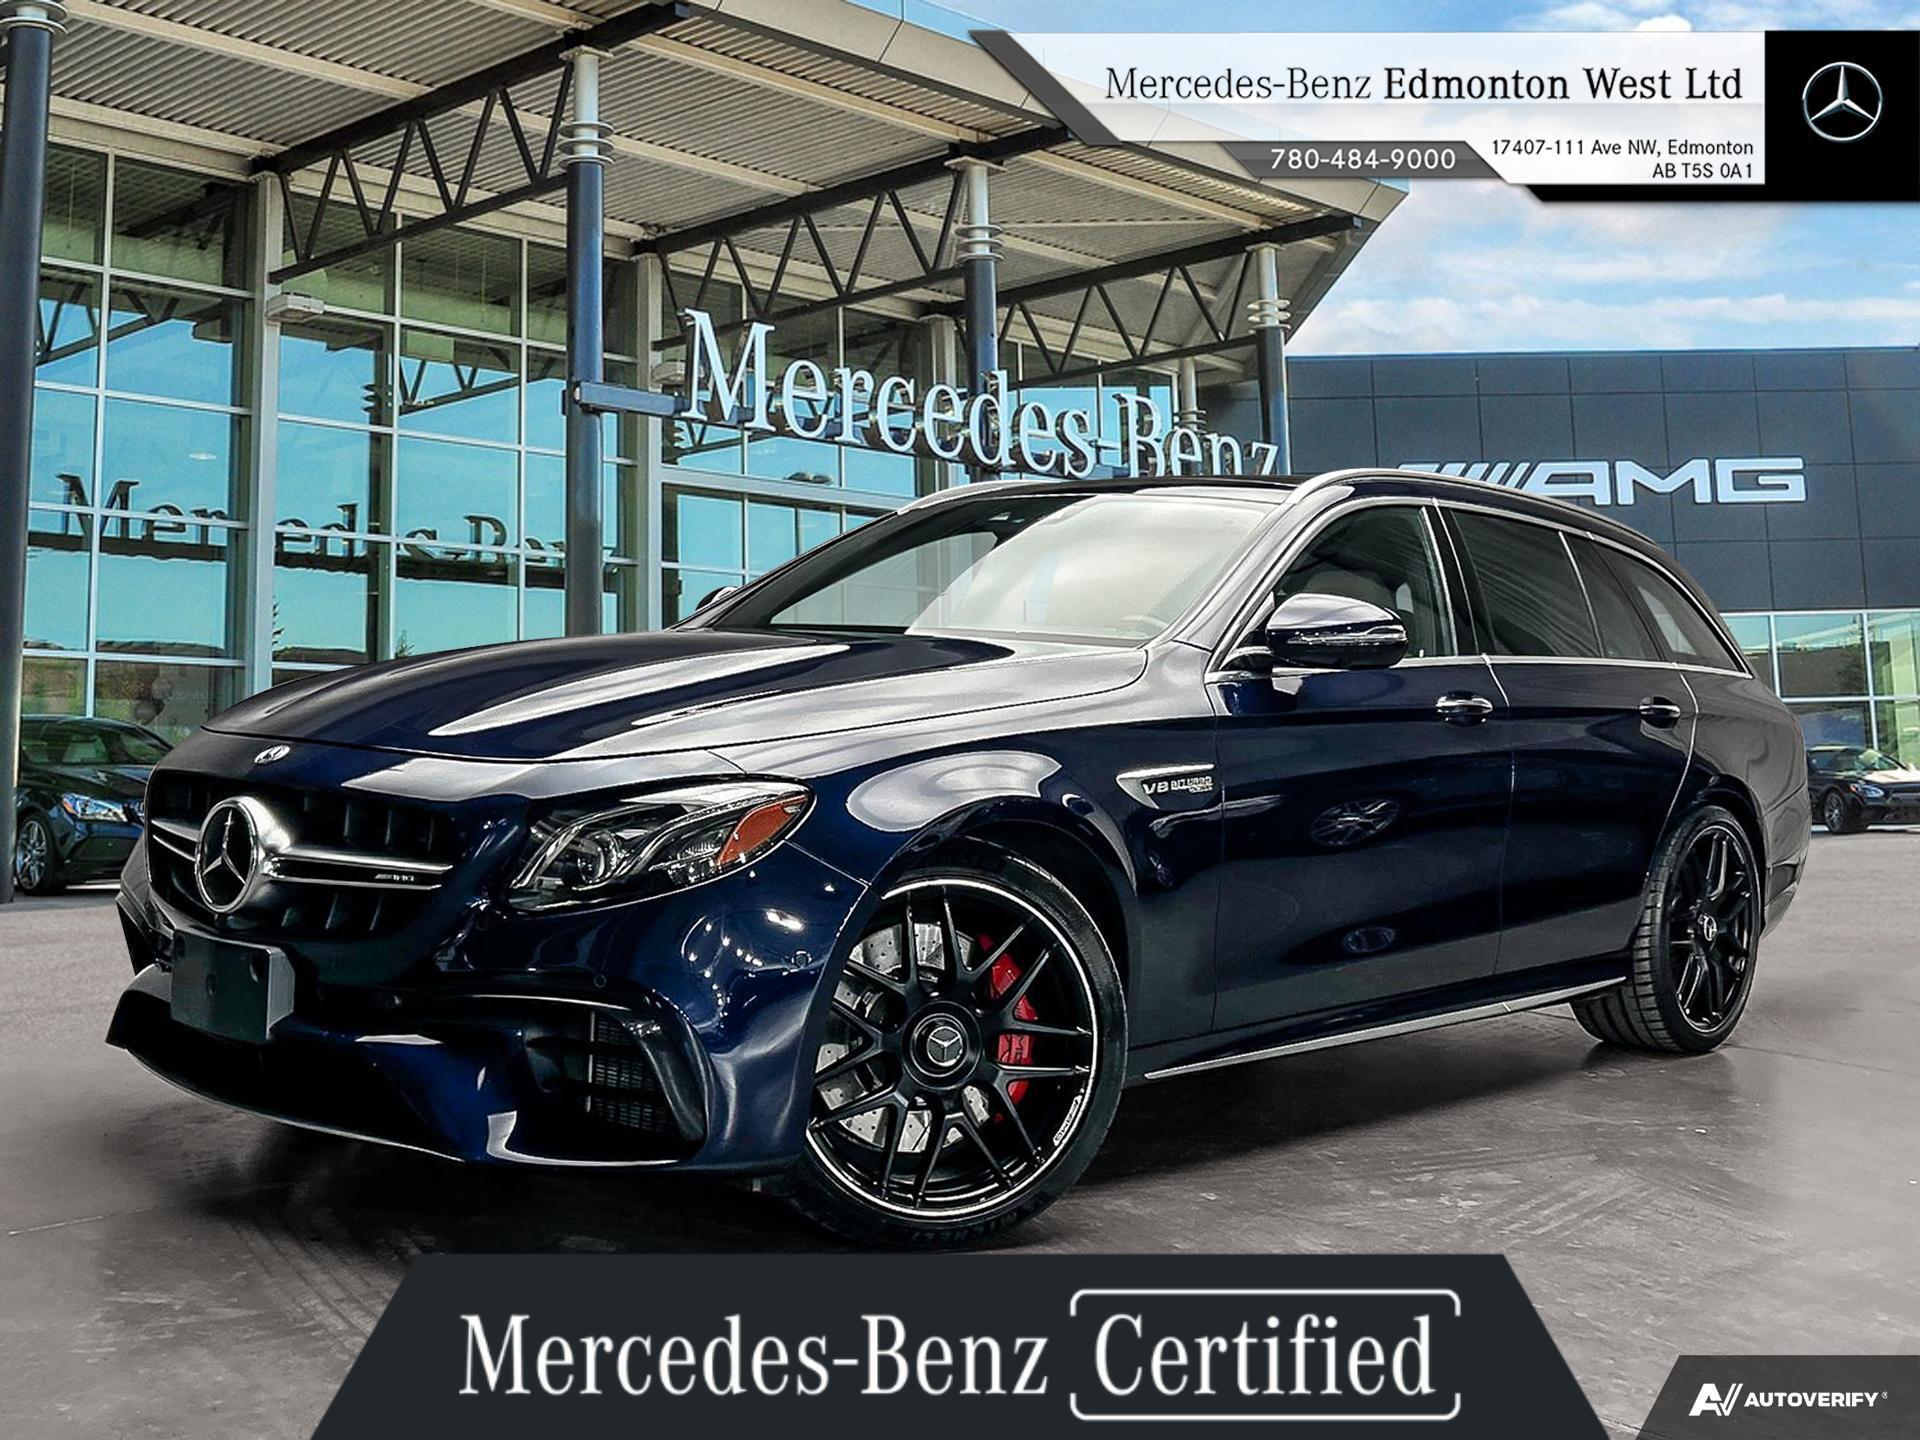 2019 Mercedes-Benz E-Class AMG E 63 S 4MATIC Wagon   - Low Kms - 603HP AMG V8